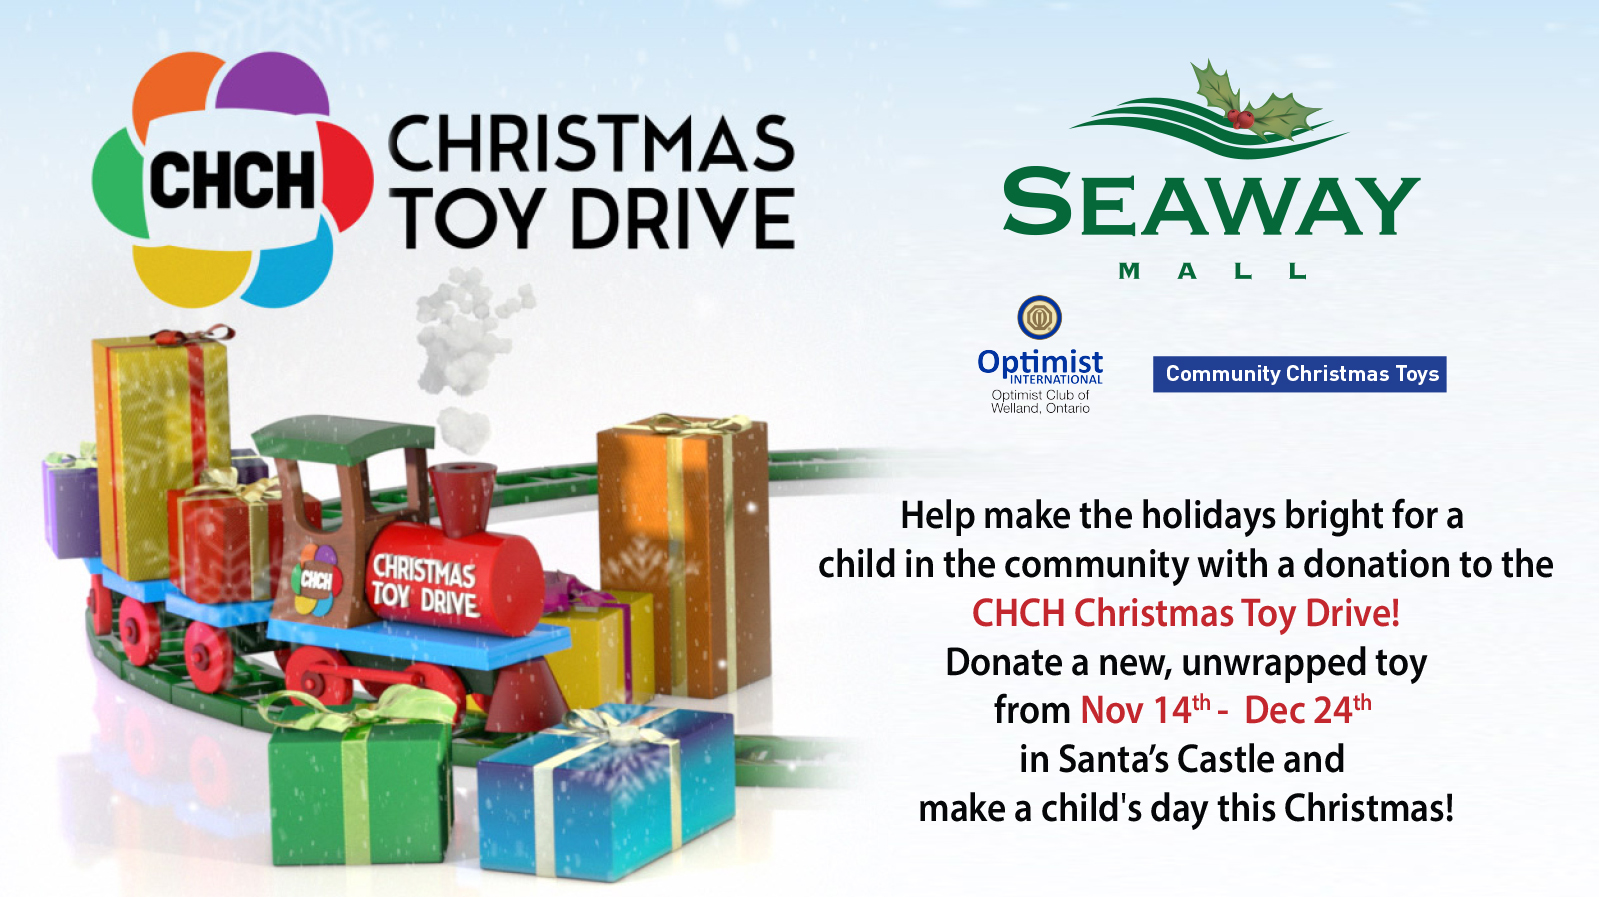 CHCH Christmas Toy Drive is BACK